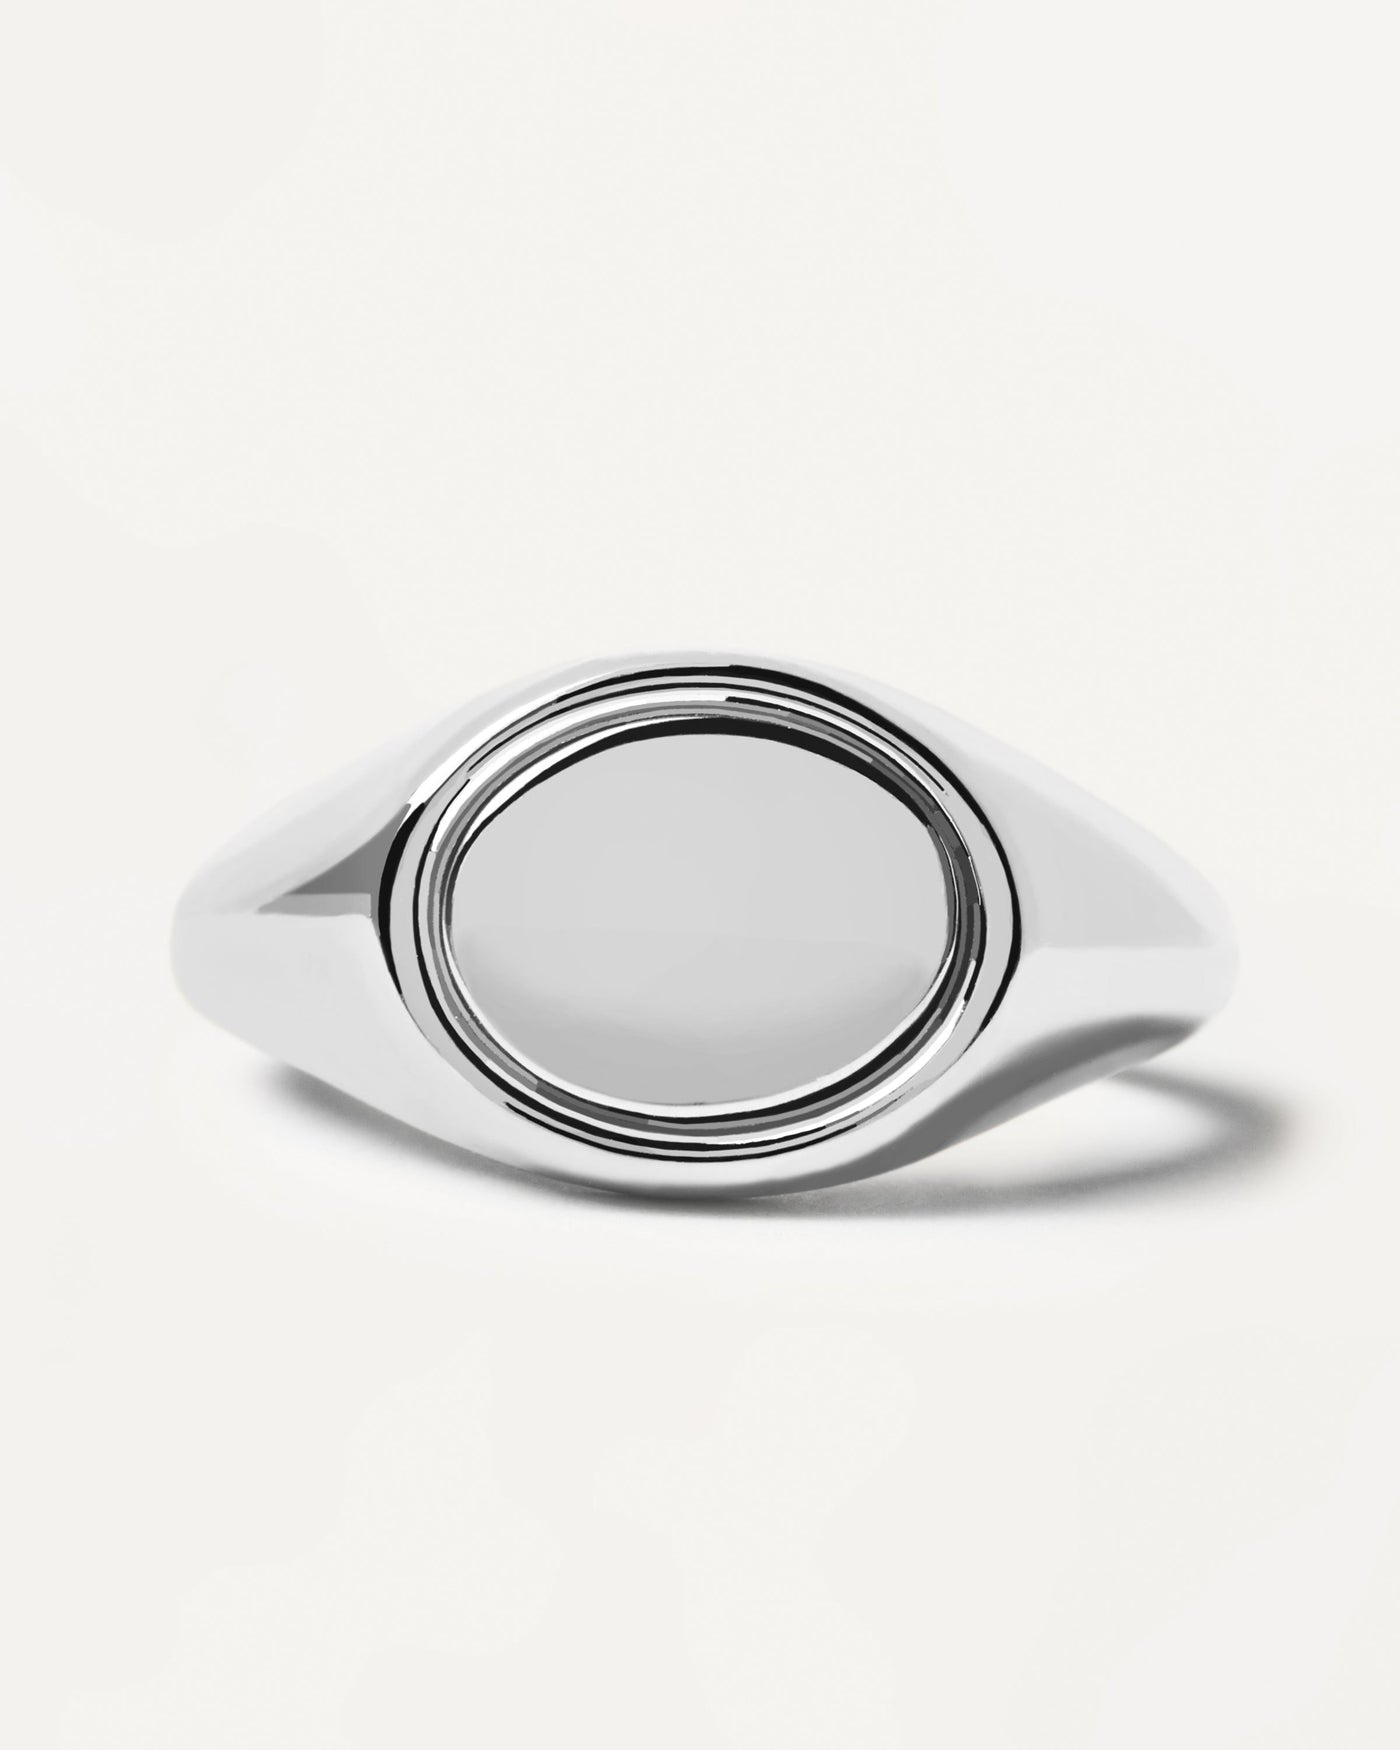 2023 Selection | Stamp Silver Ring. Engravable oval shape signet ring in sterling silver. Get the latest arrival from PDPAOLA. Place your order safely and get this Best Seller. Free Shipping.